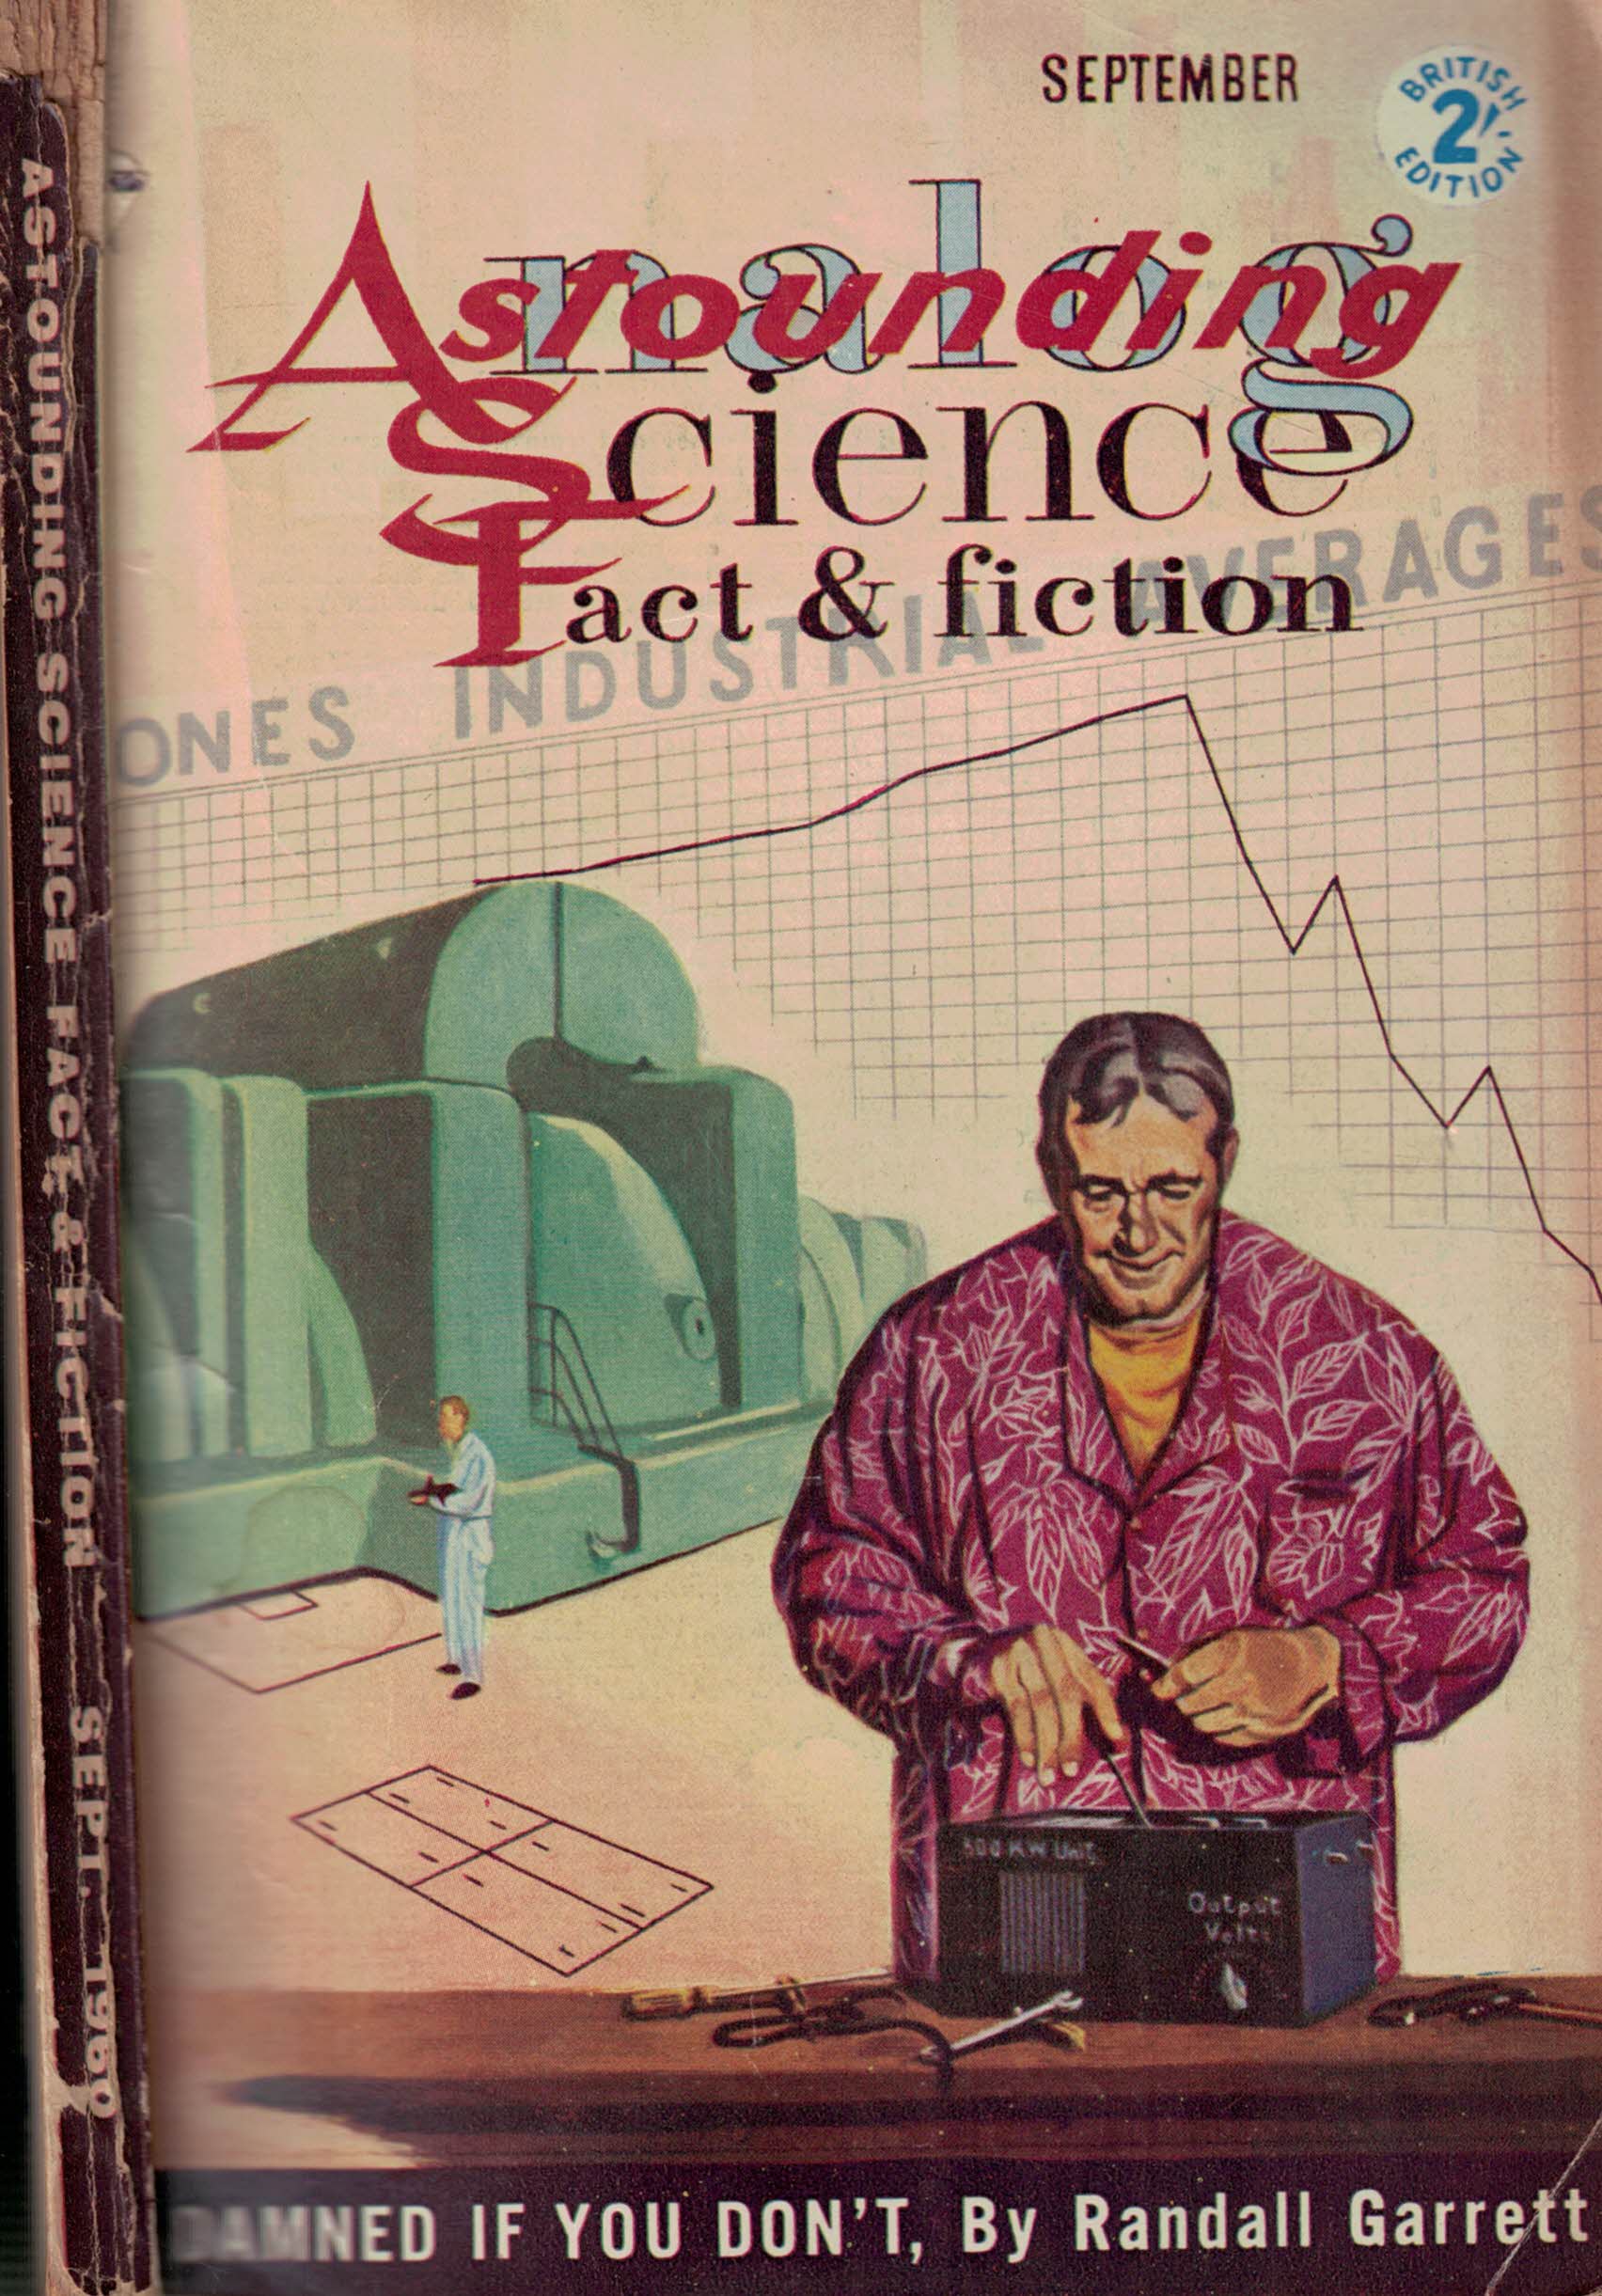 Astounding Science. Fact & Fiction. Volume 16, Number 7. September 1960. British edition.